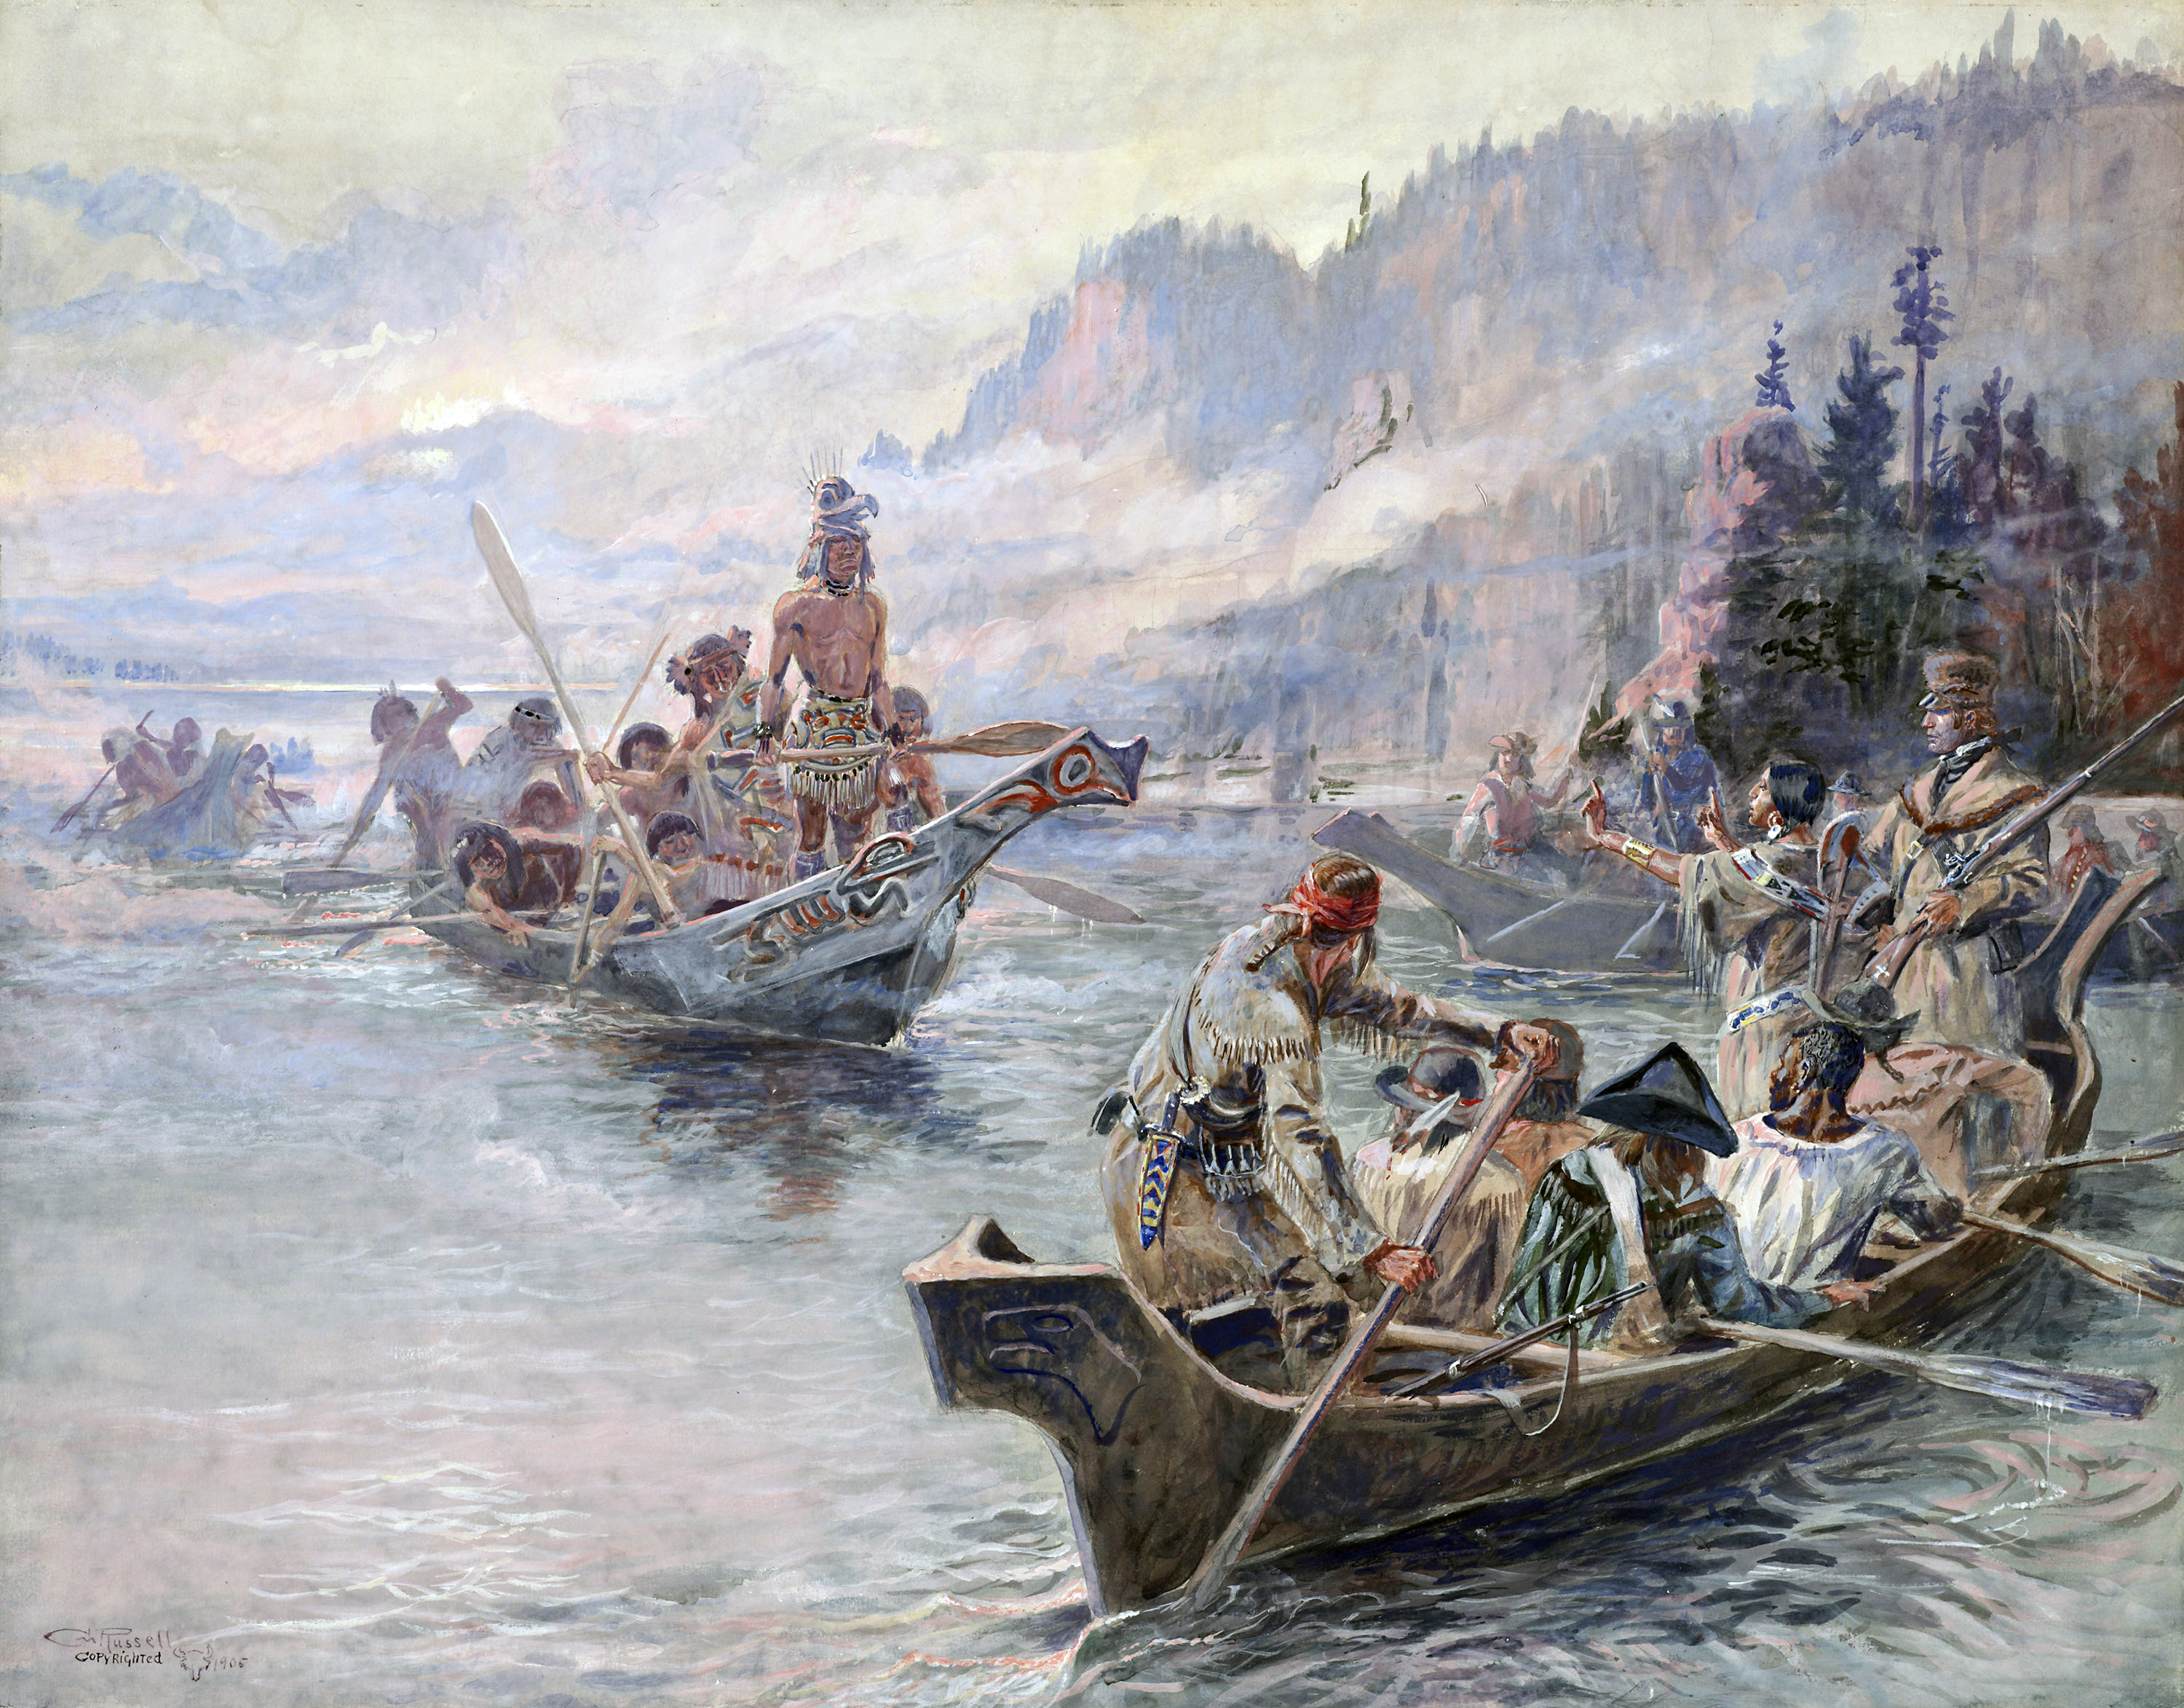 Lewis_and_clark-expedition.jpg